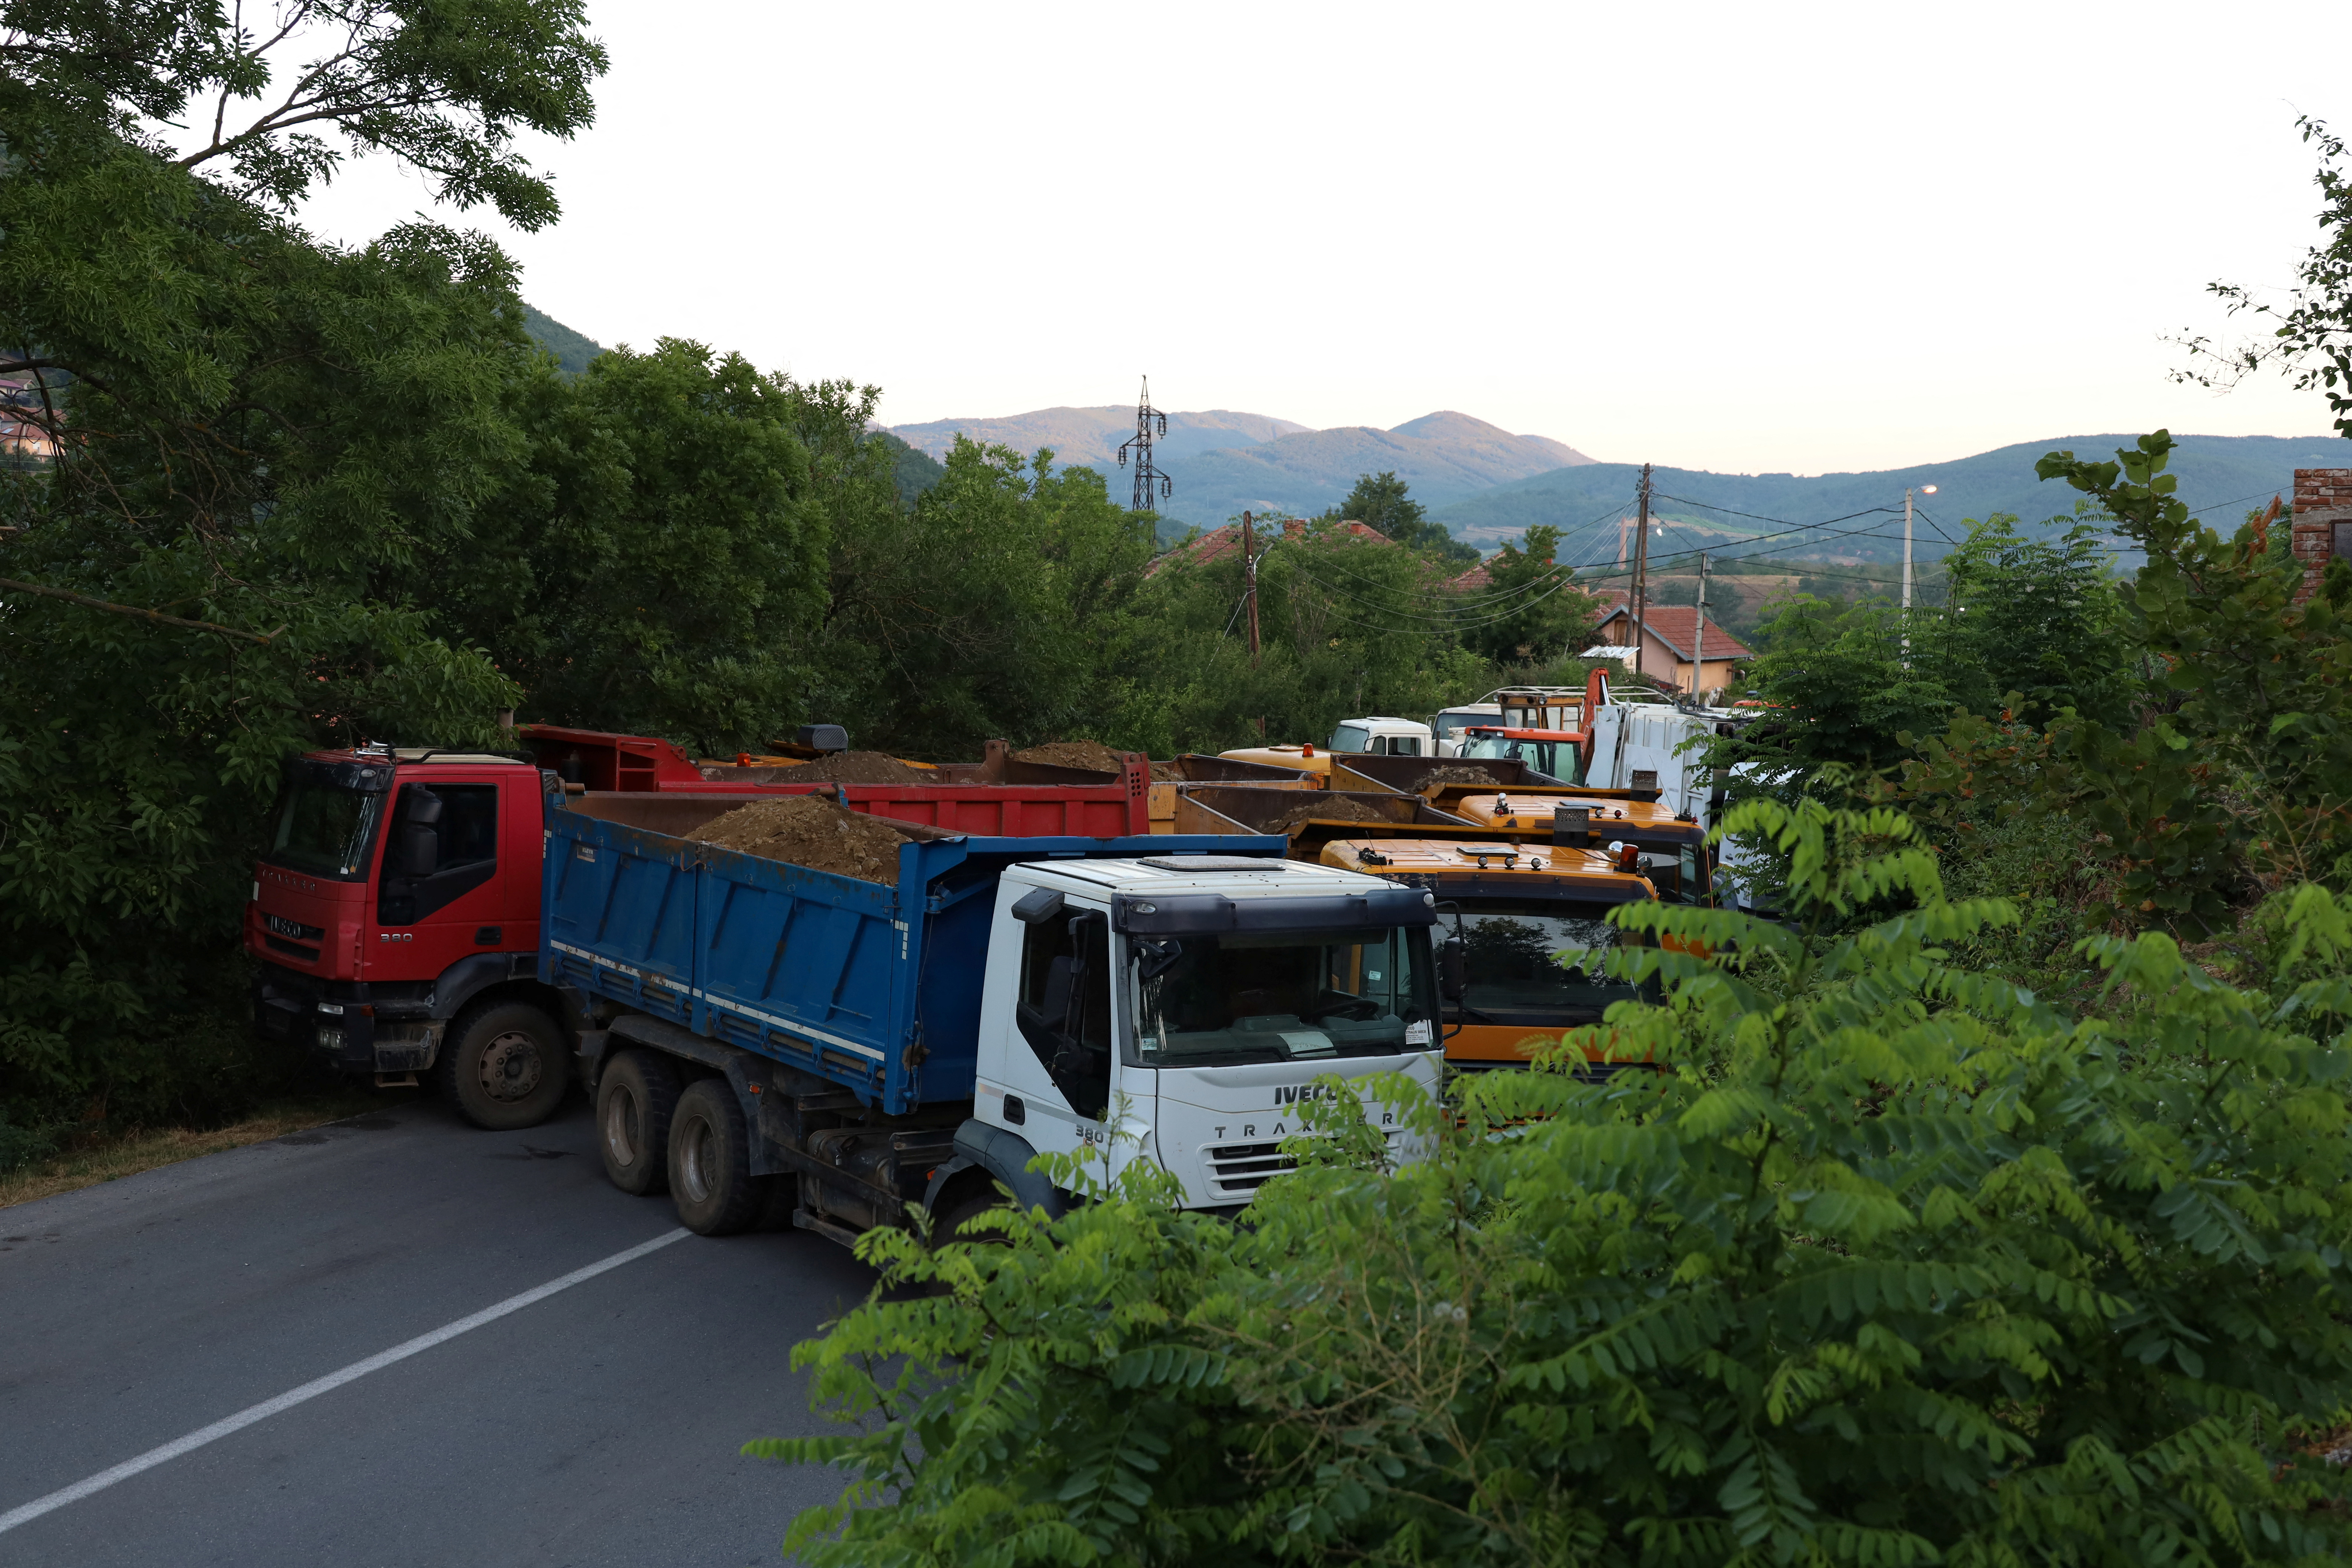 A general view shows trucks blocking thae road in Rudare